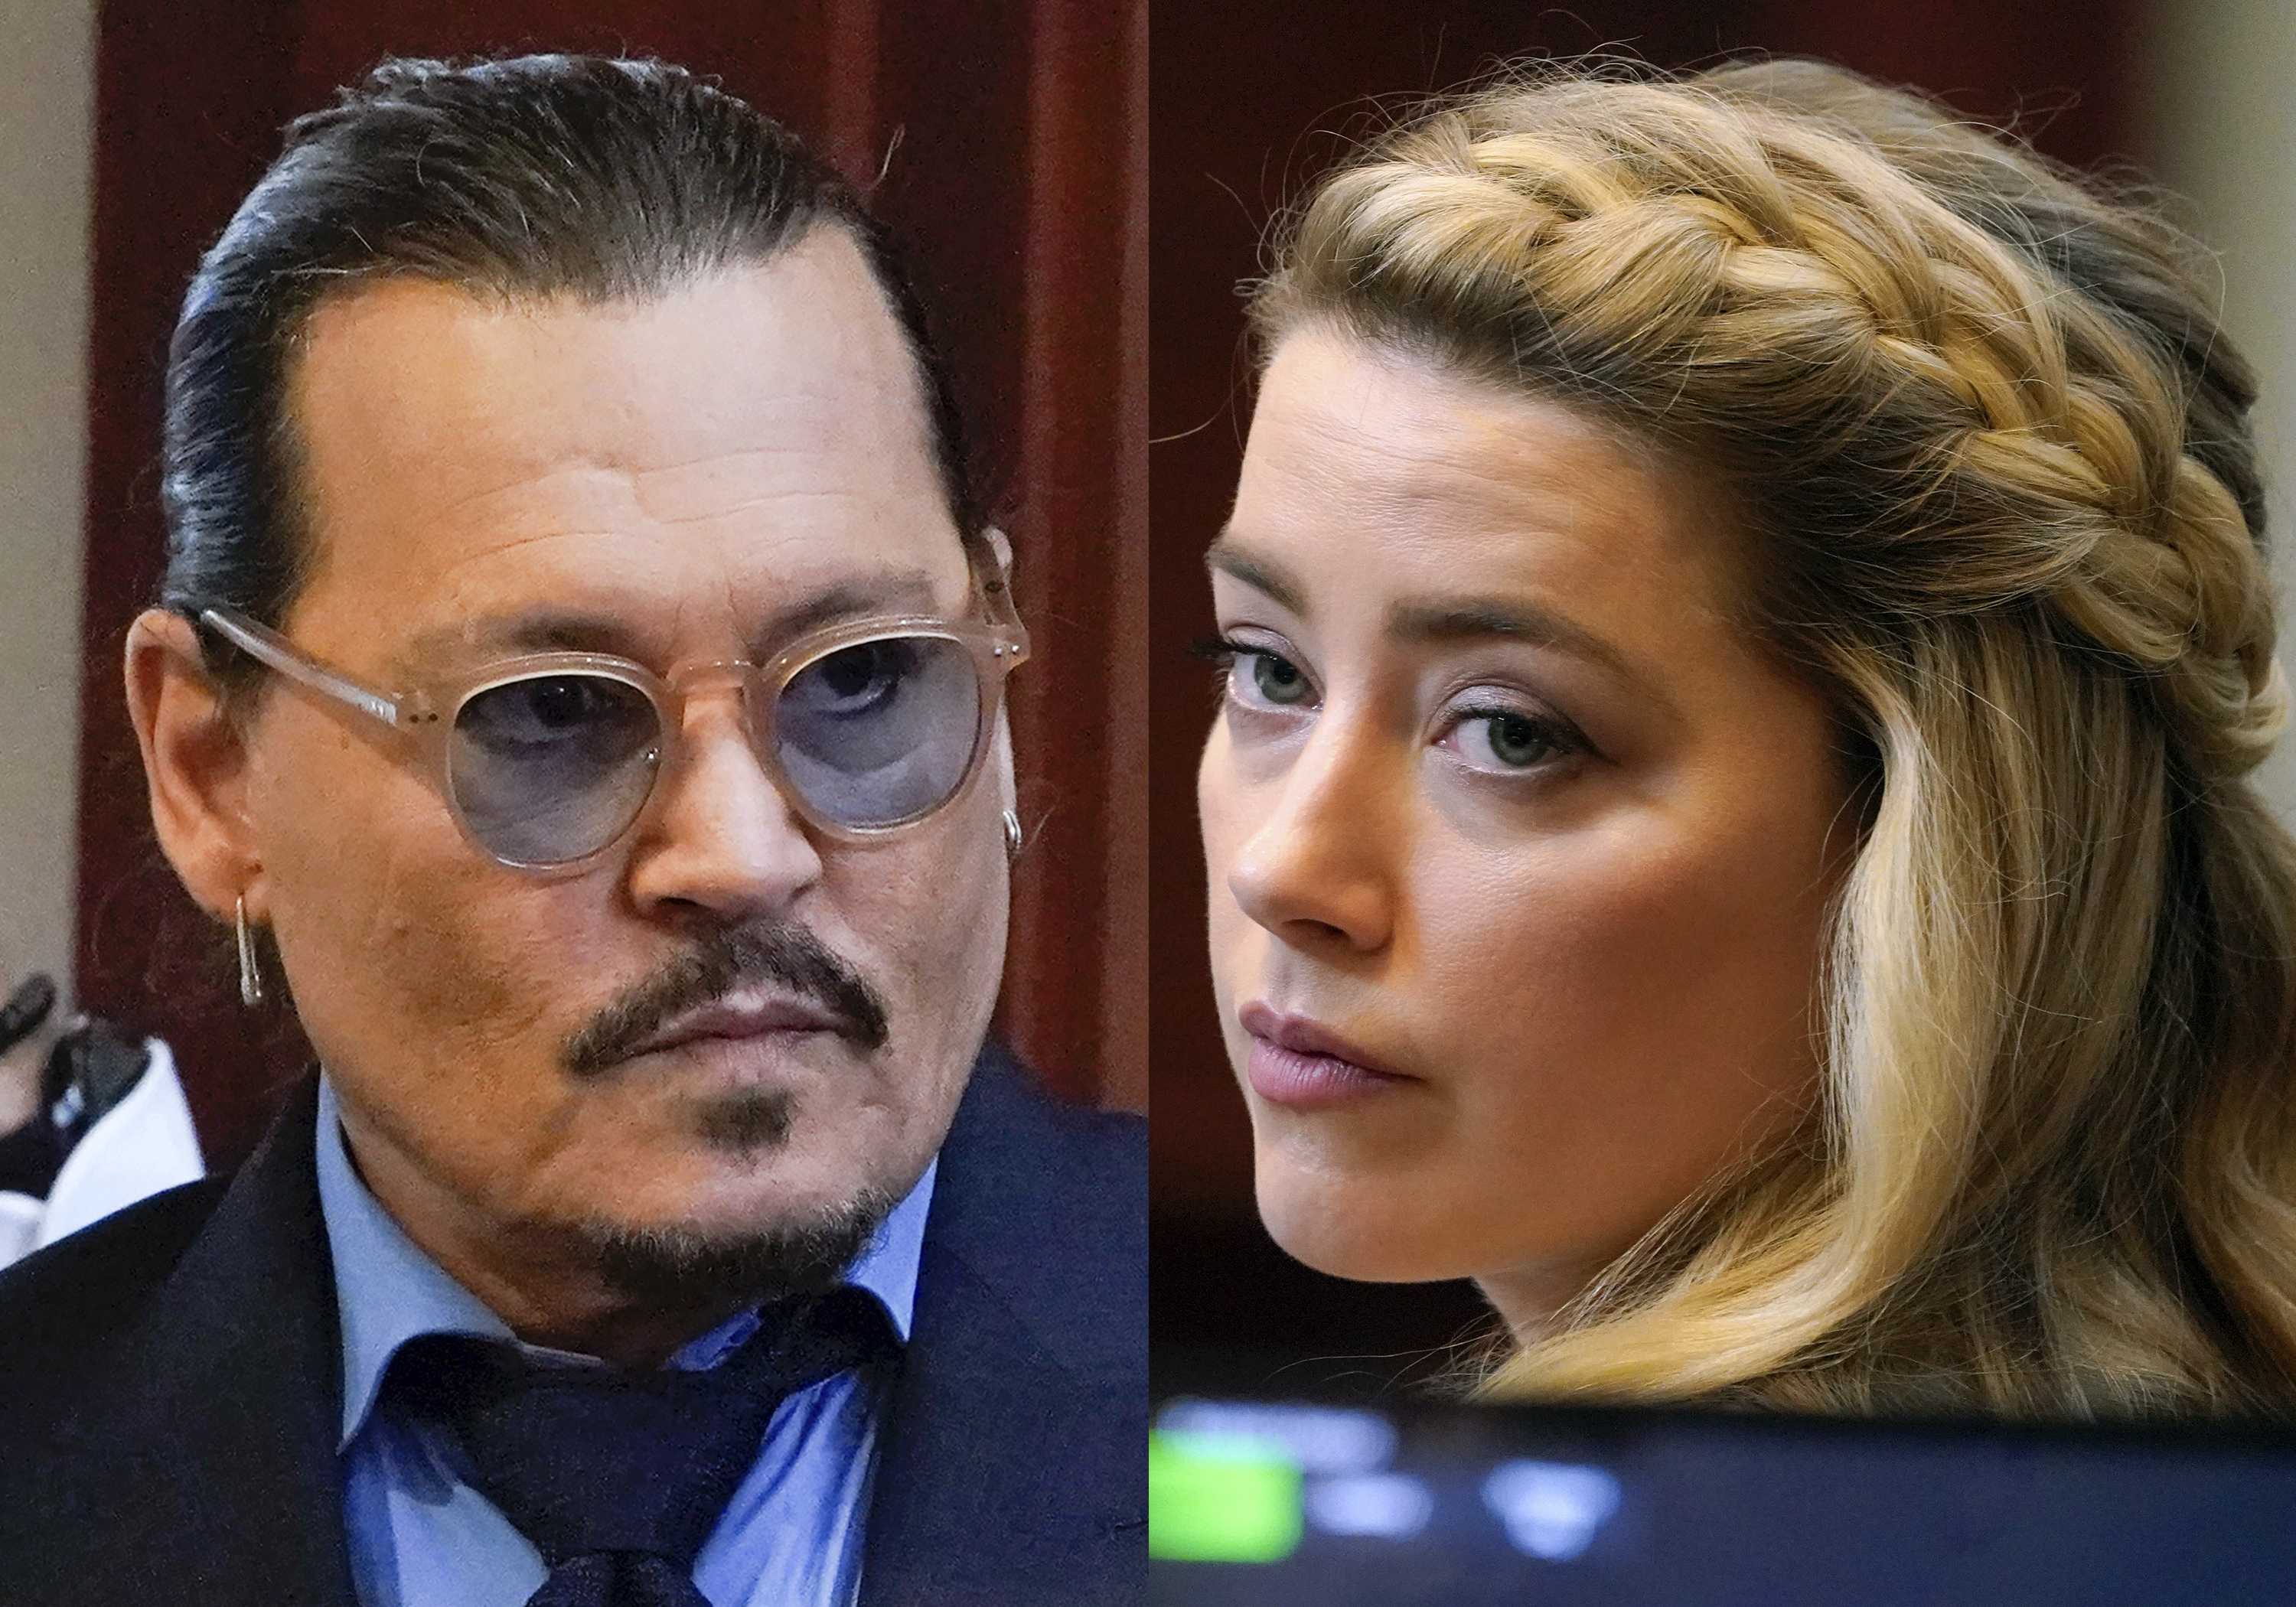 Jury sides with Johnny Depp on lawsuit, ex-wife Amber Heard on counterclaim